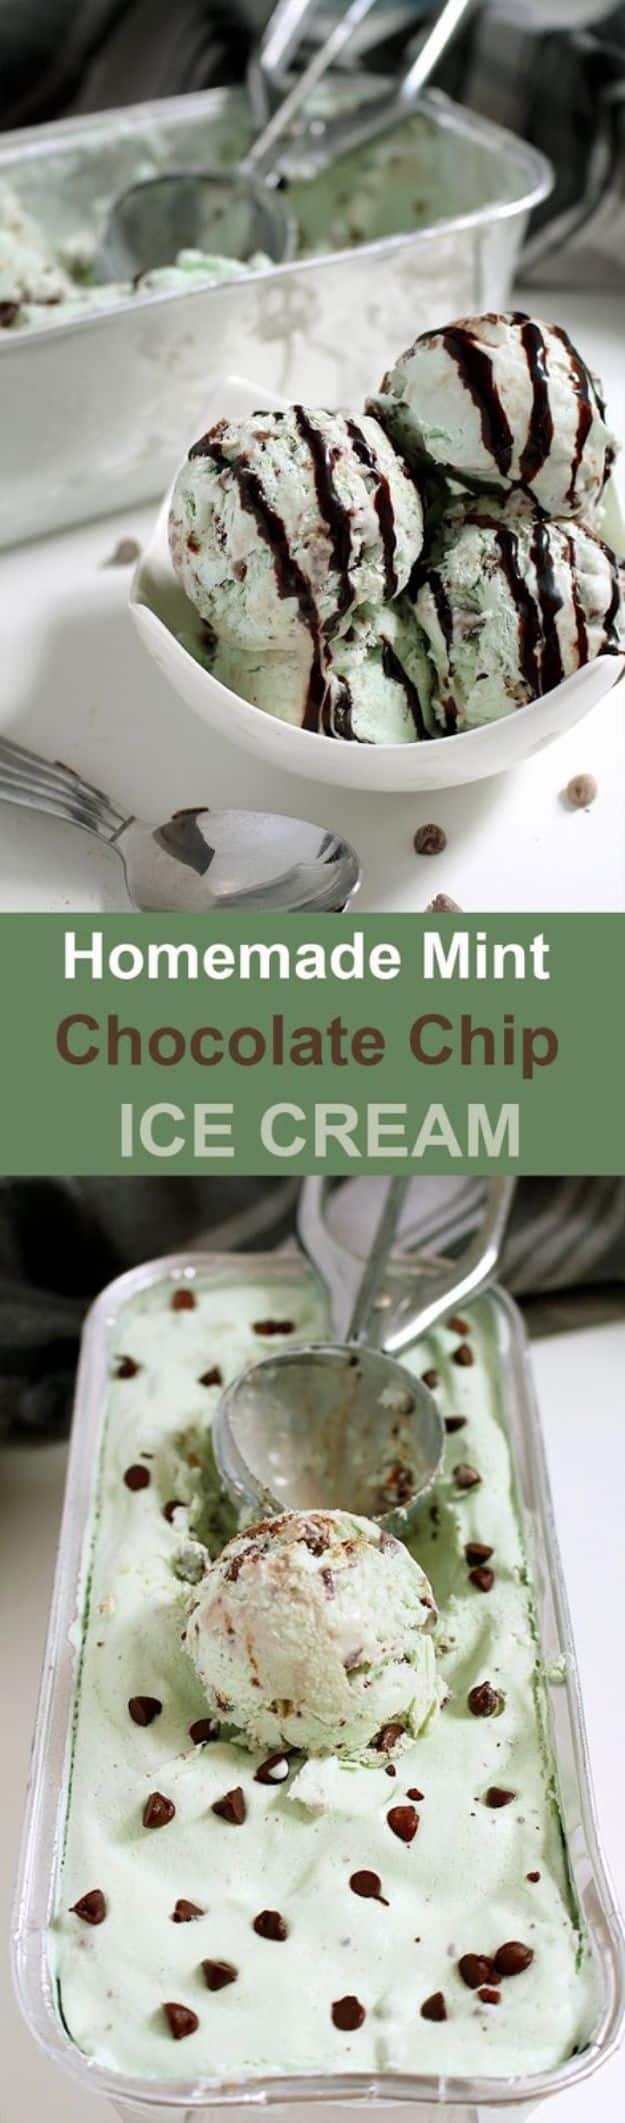 Chocolate Desserts and Recipe Ideas - Homemade Mint Chocolate Chip Ice Cream - Easy Chocolate Recipes With Mint, Peanut Butter and Caramel - Quick No Bake Dessert Idea, Healthy Desserts, Cake, Brownies, Pie and Mousse - Best Fancy Chocolates to Serve for Two 